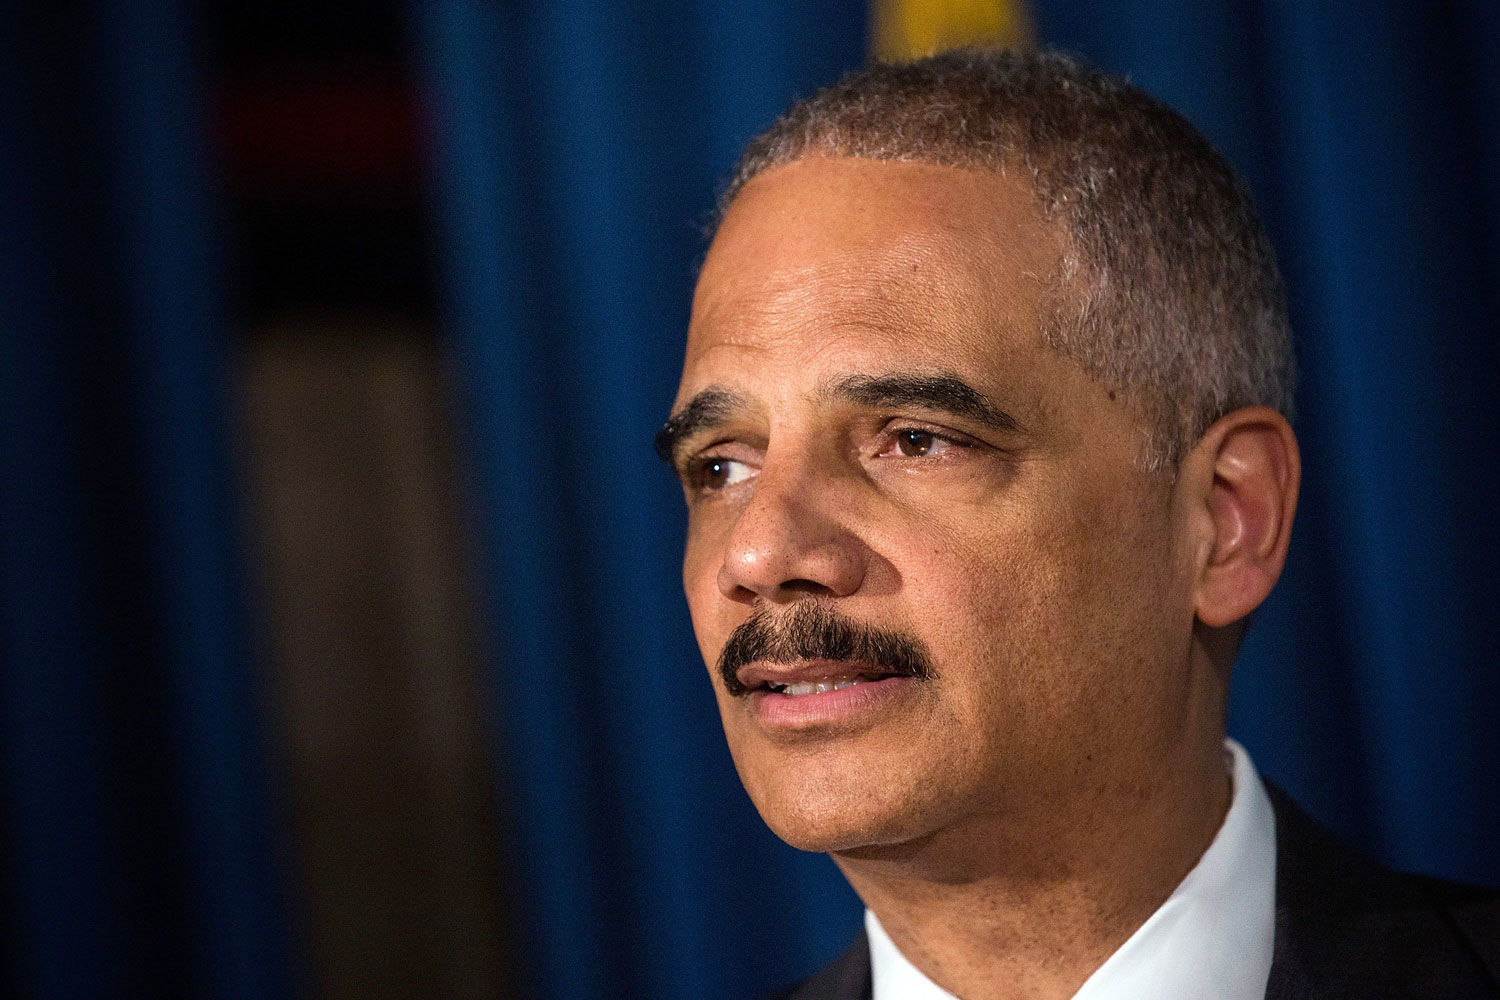 Attorney General Eric Holder speaks at a press conference on April 1, 2014 in New York. (Andrew Burton—Getty Images)